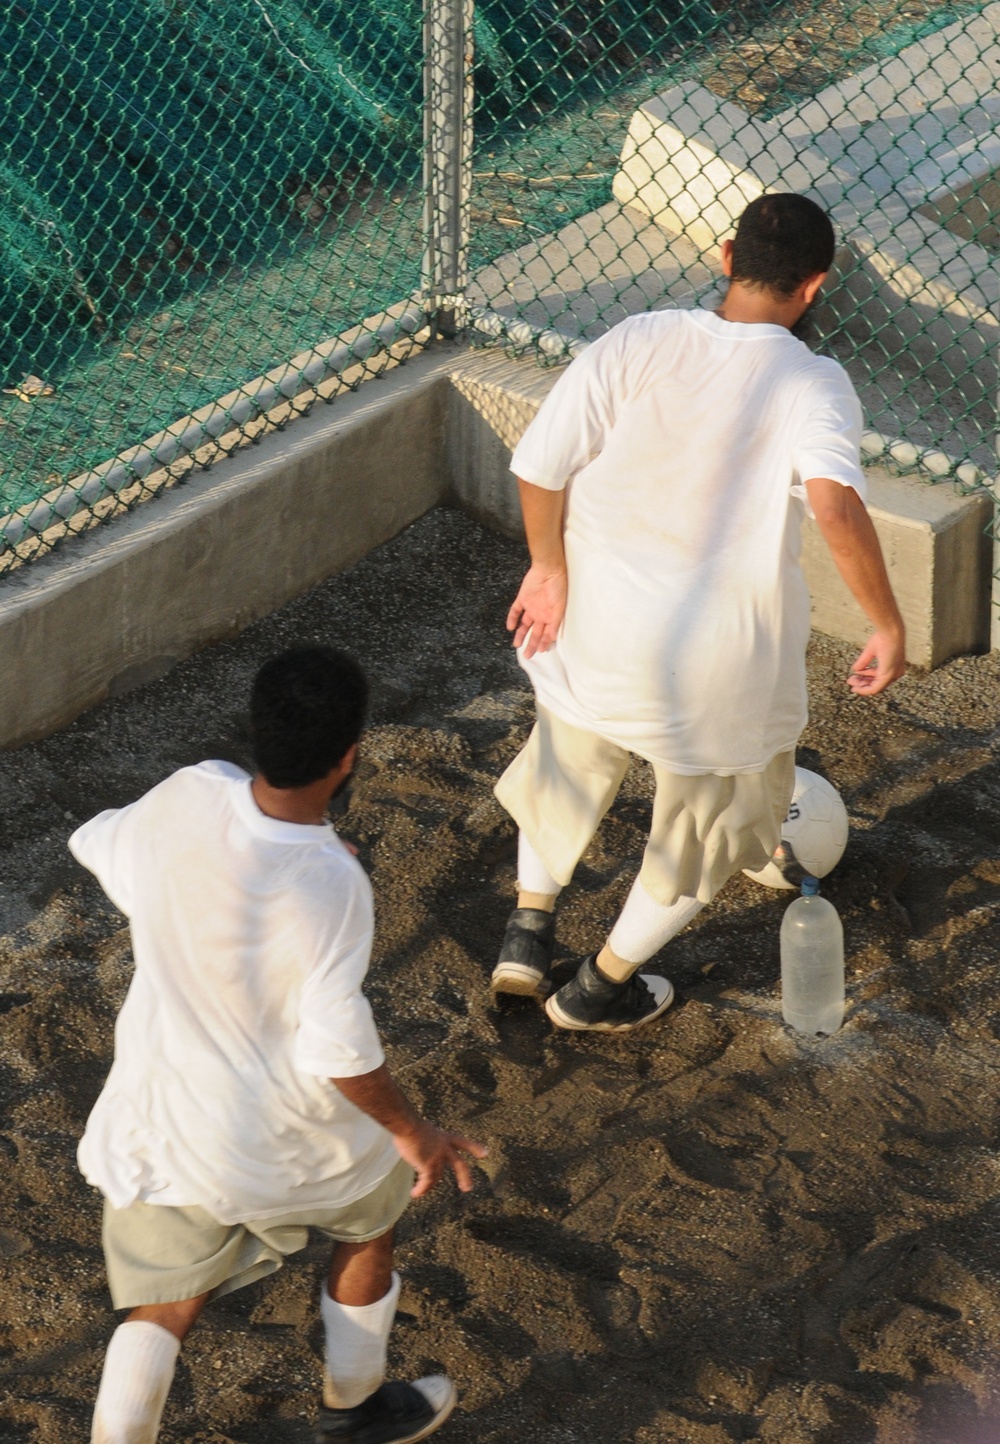 Detainees play soccer within the outdoor recreation area of Camp Six at Joint Task Force Guantanamo